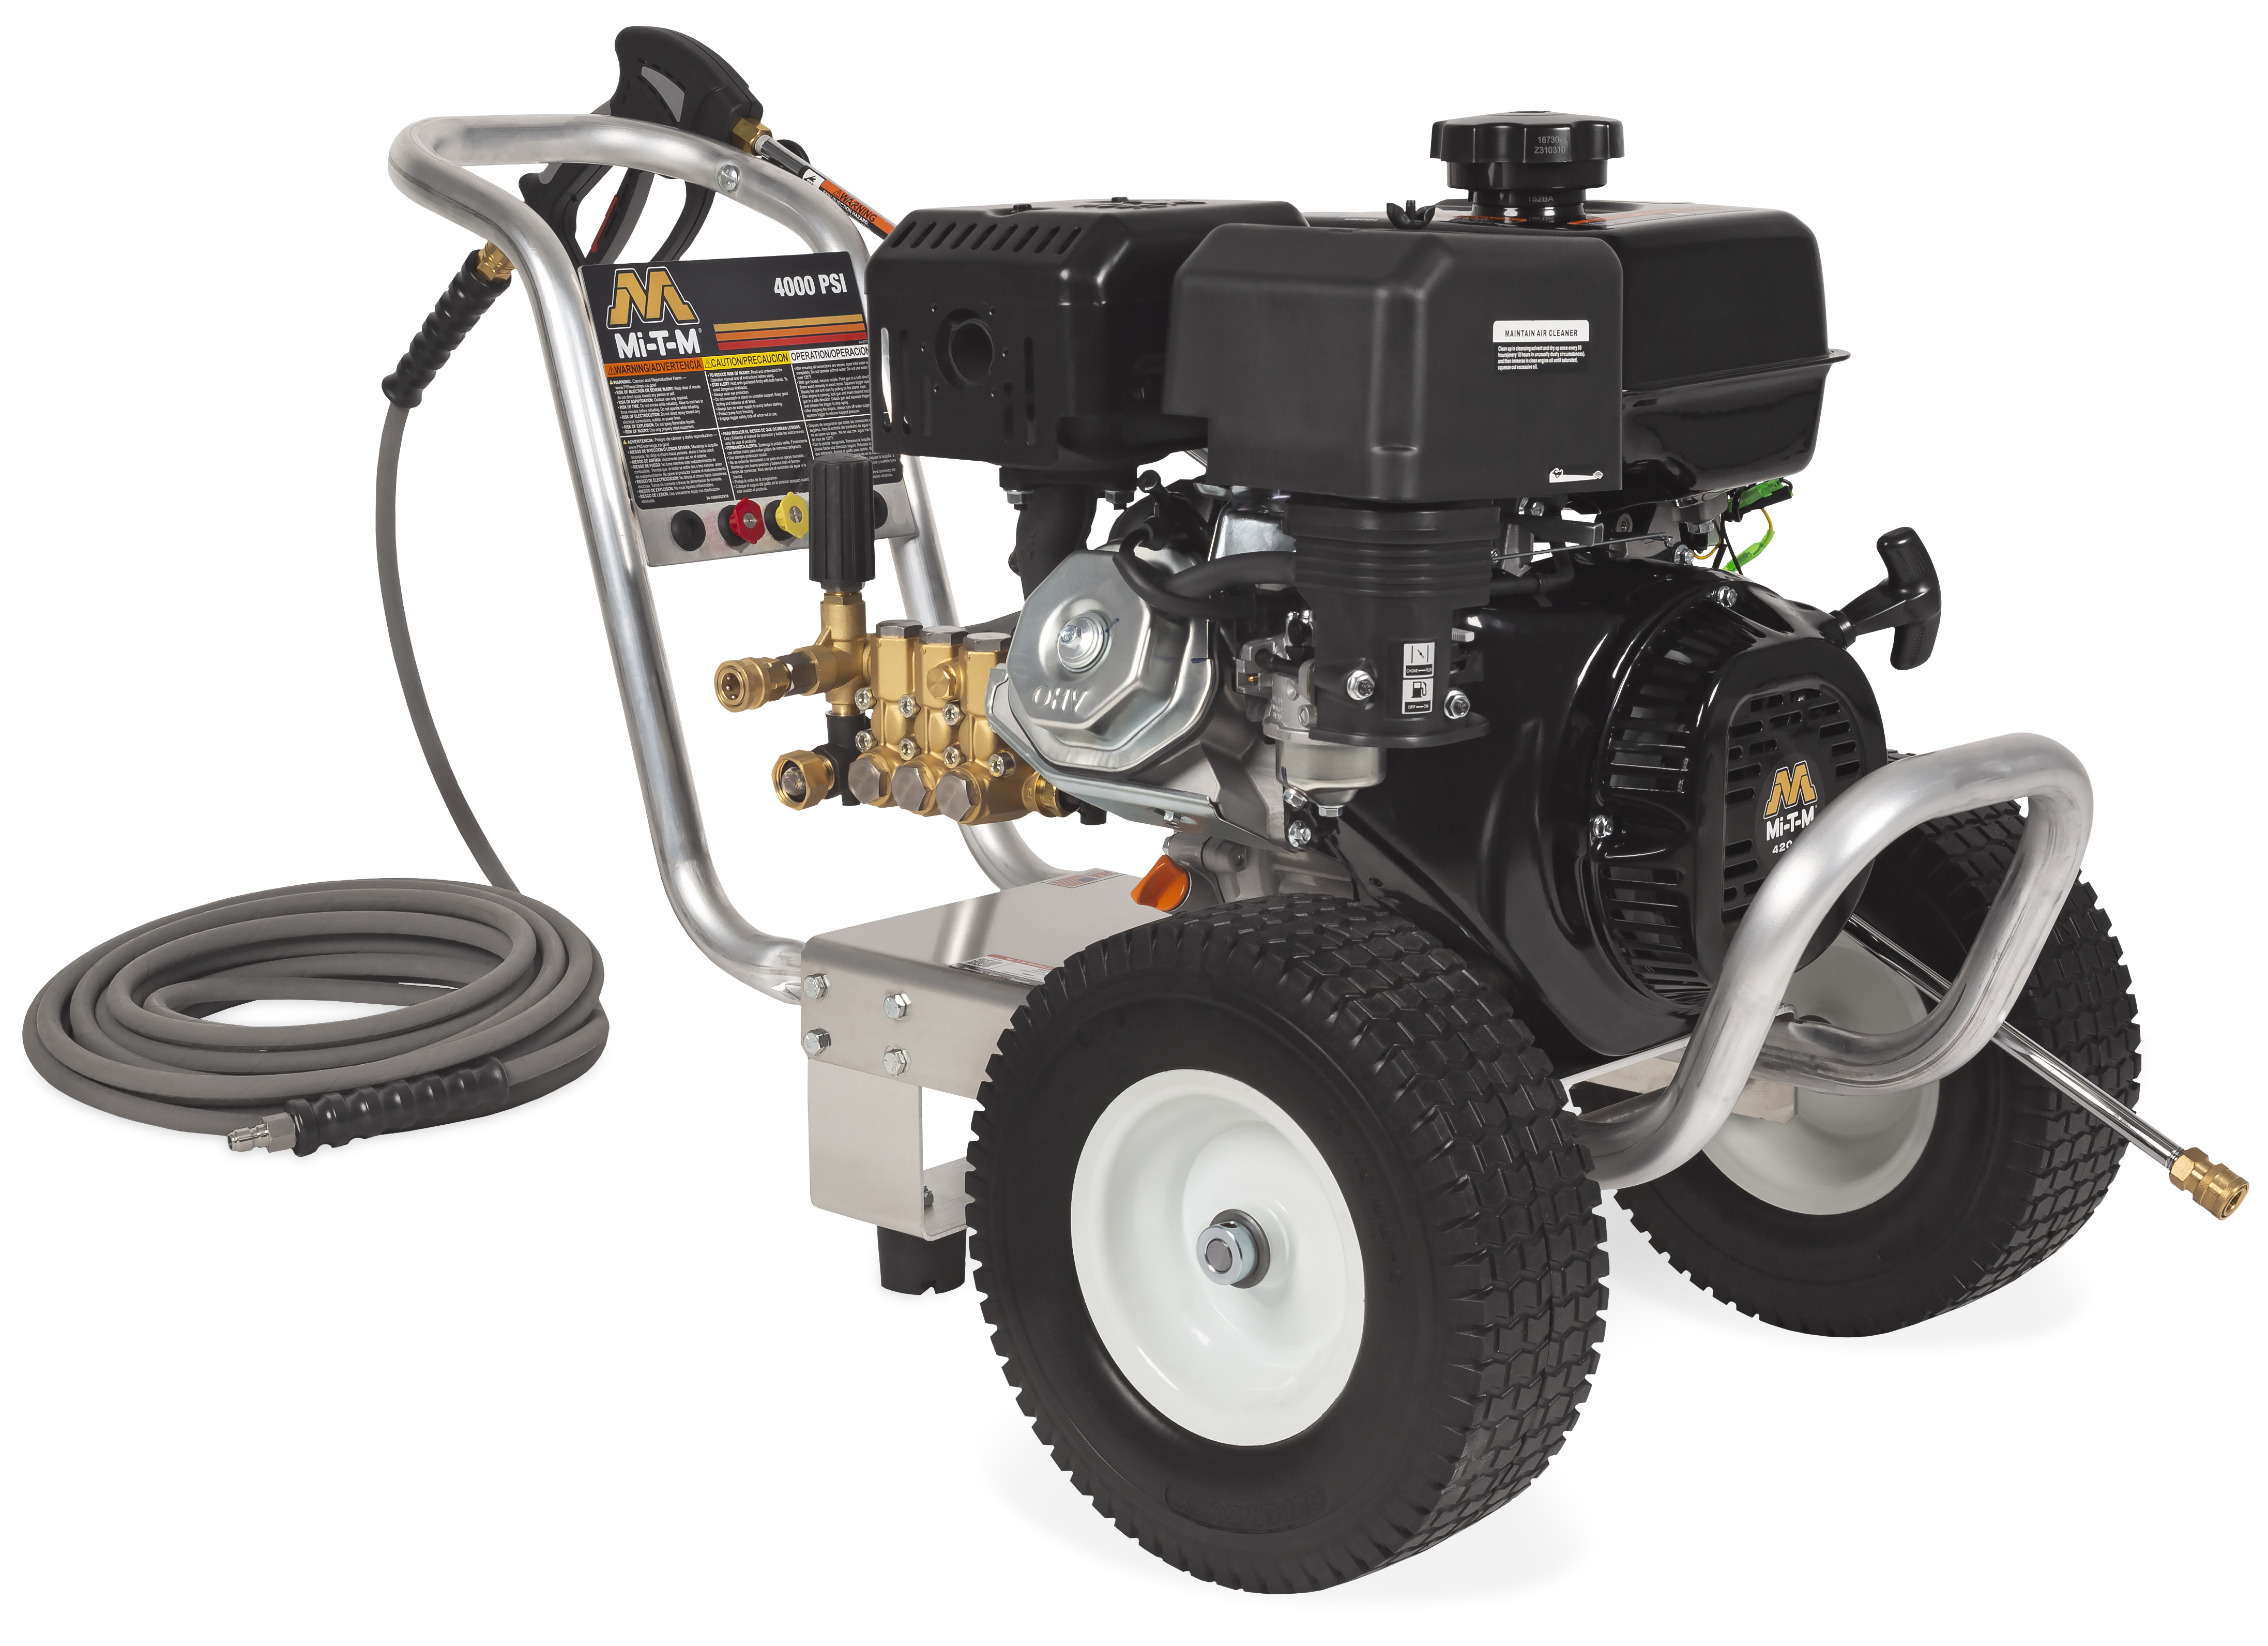 Job Pro Aluminum Series Gas Cold Water Pressure Washer